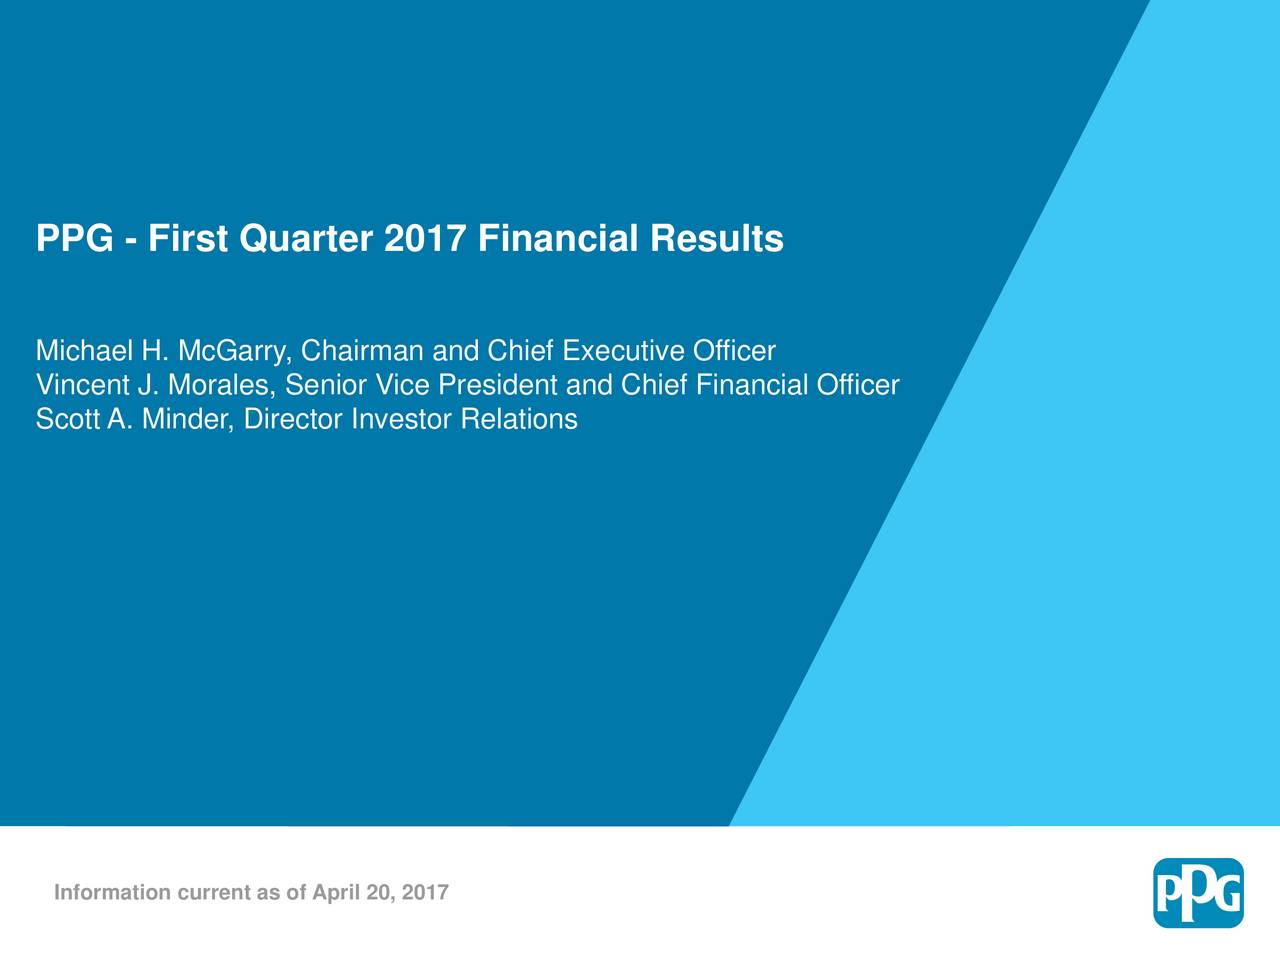 Michael H. McGarry, Chairman and Chief Executive Officer Vincent J. Morales, Senior Vice President and Chief Financial Officer Scott A. Minder, Director Investor Relations Information current as of April 20, 2017